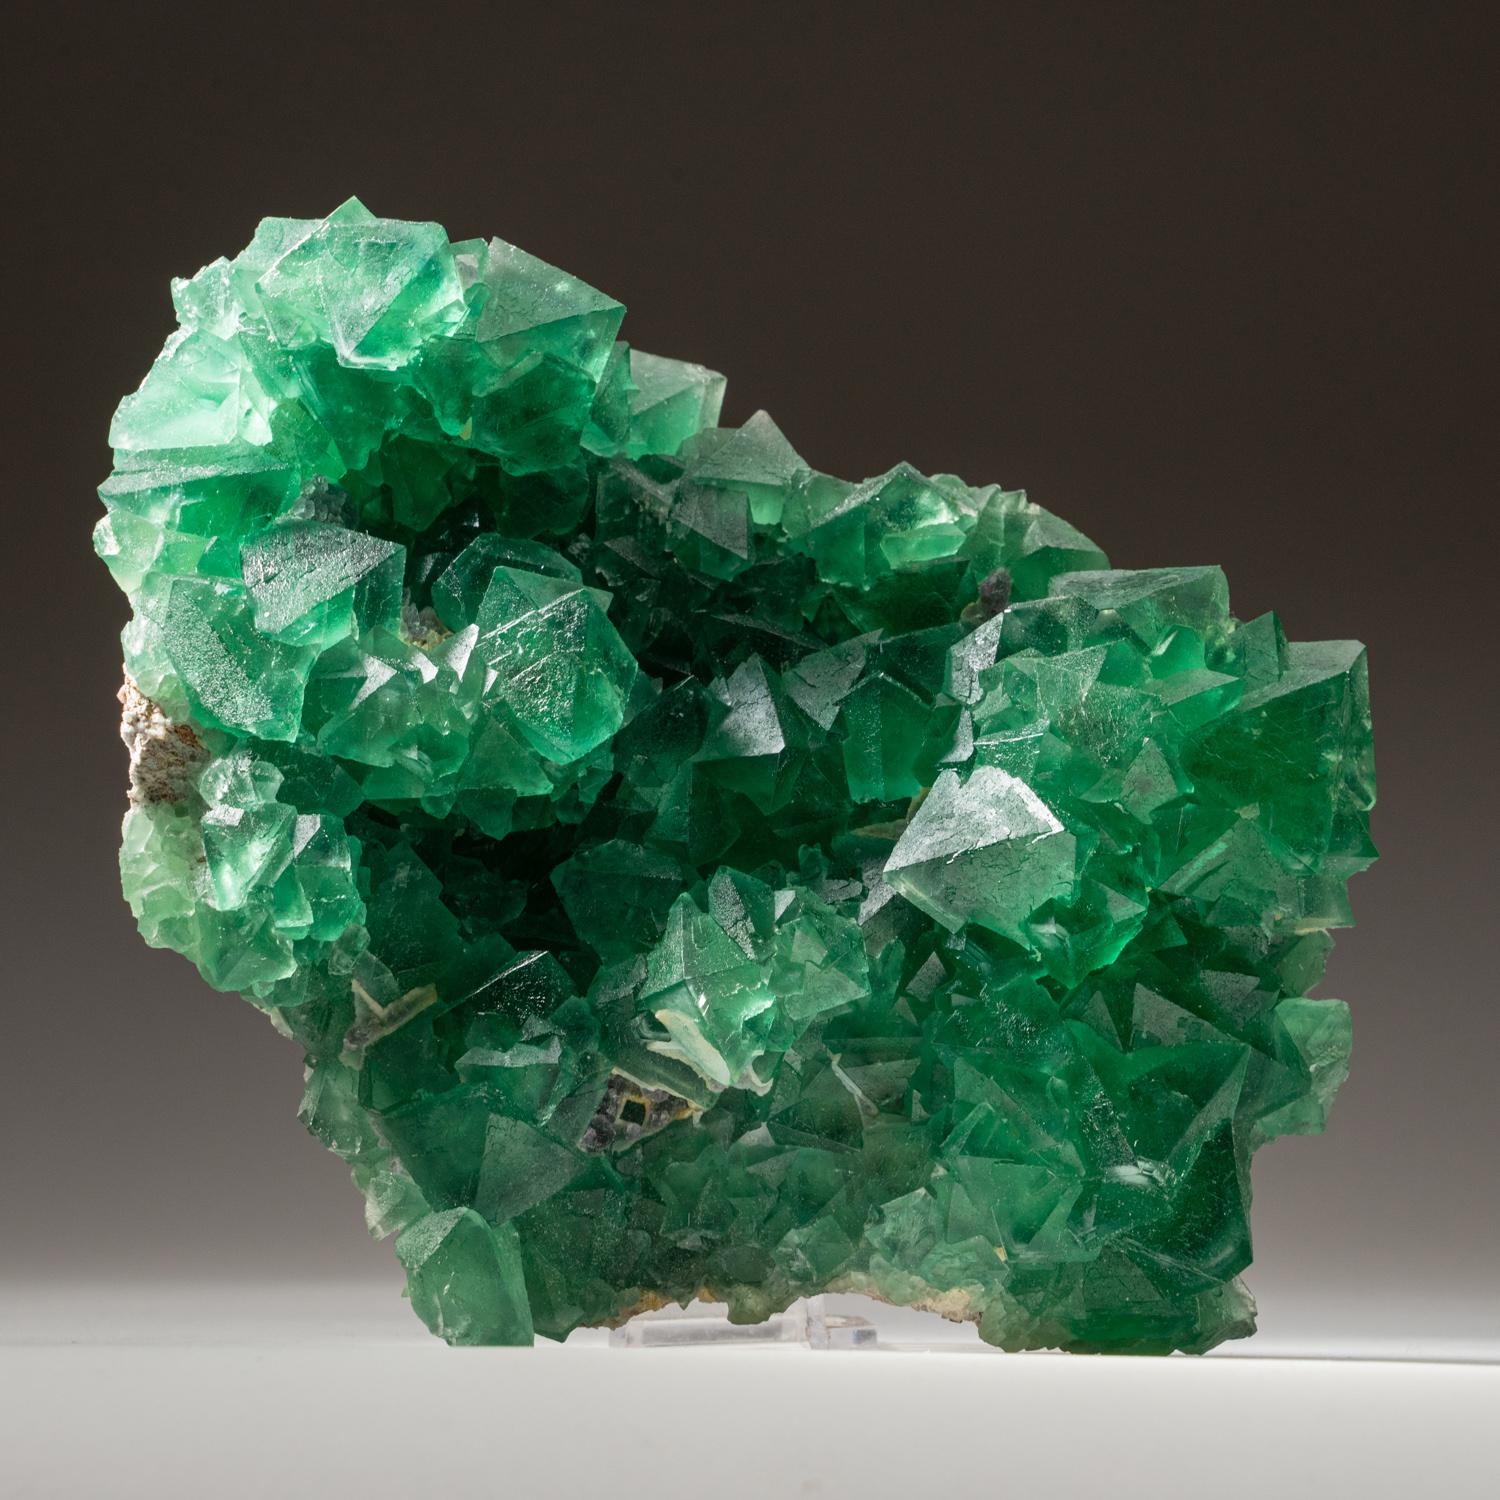 Green Fluorite Cluster from Yaogangxian Mine, Nanling Mountains, Hunan Province, China. 

Complex intersecting formation of transparent emerald fluorite crystals showing a well defined octahedral form.

Weight: 2.20 lbs

Size: 6 x 2 x 5 inches.